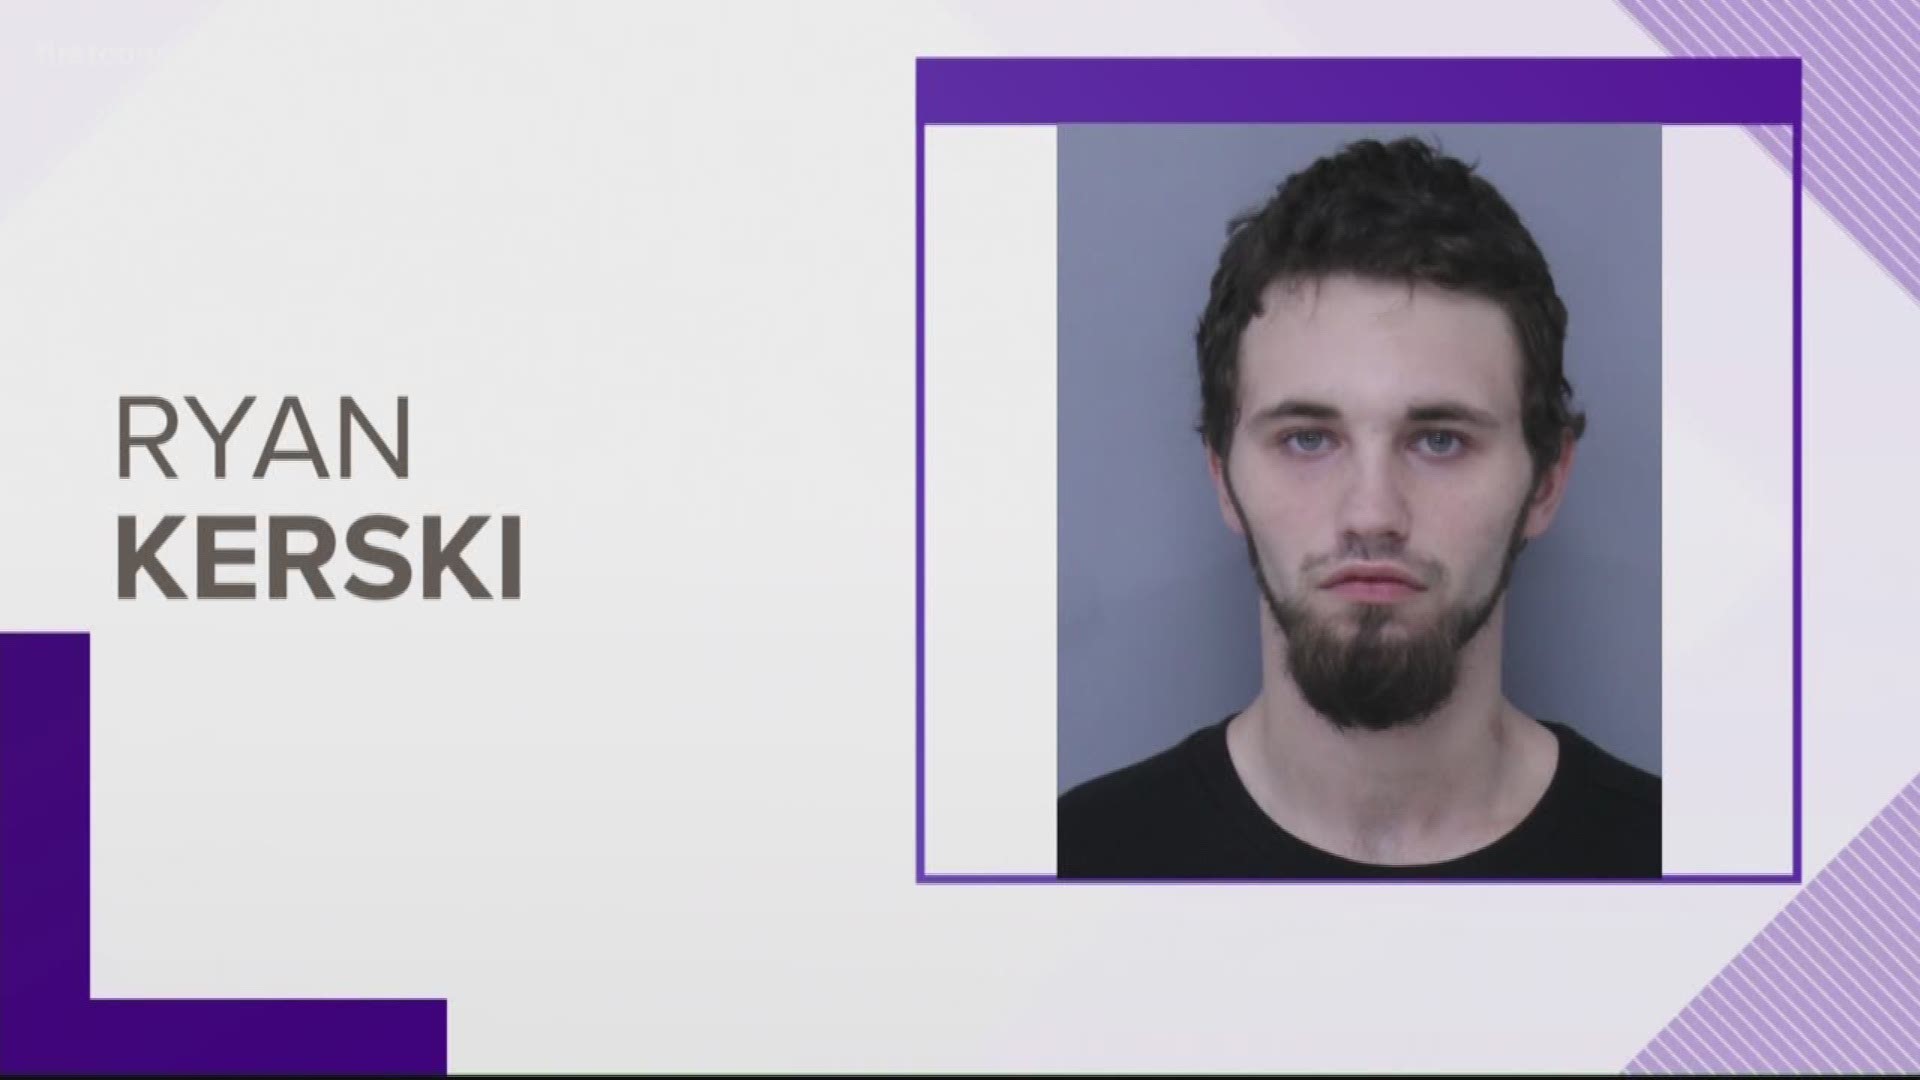 Ryan Kerski faces one count of lewd and lascivious behavior along with one count of possession of obscene material, according to the St. Johns County inmate website.